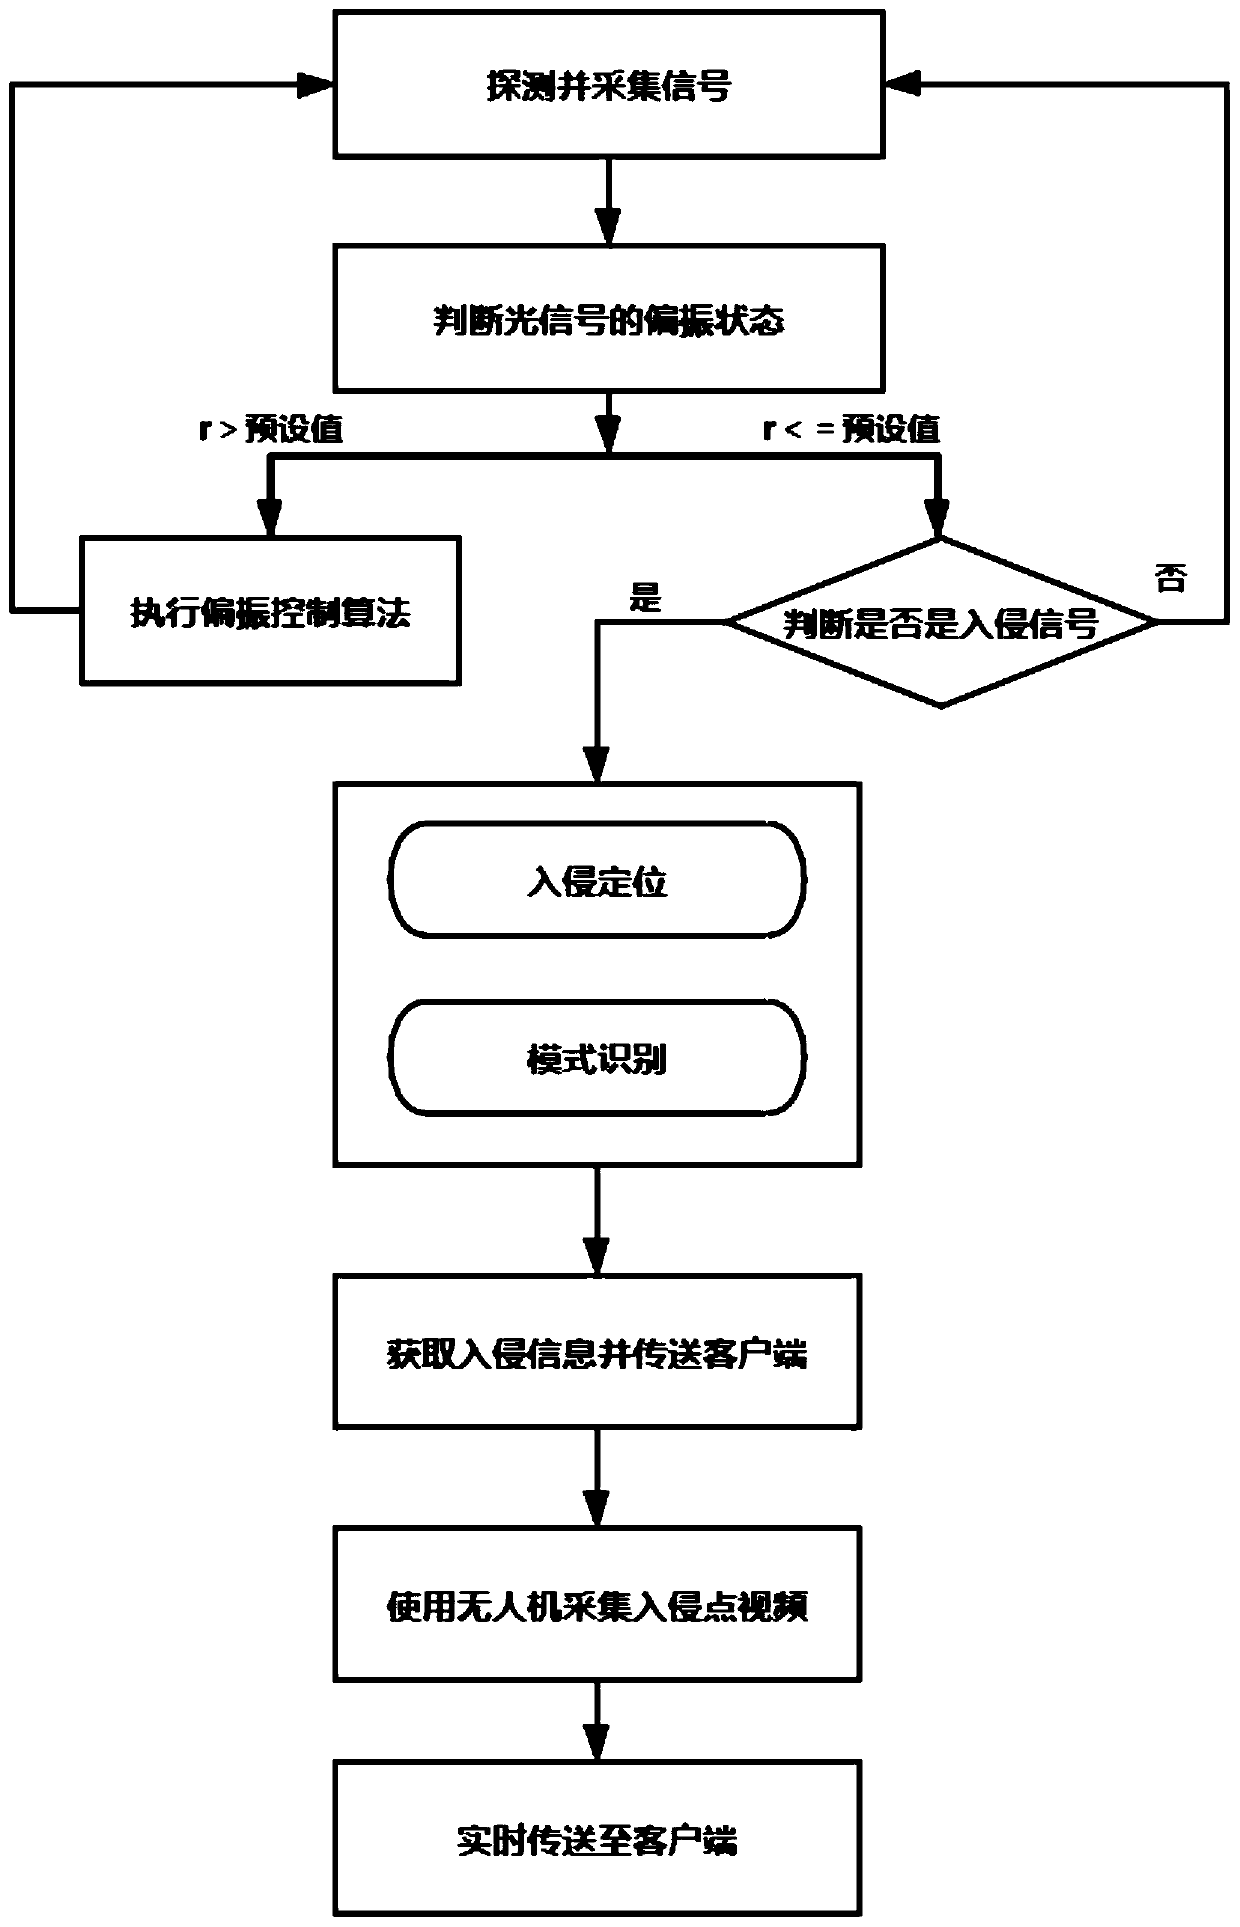 Long-distance perimeter security positioning and monitoring device and method thereof